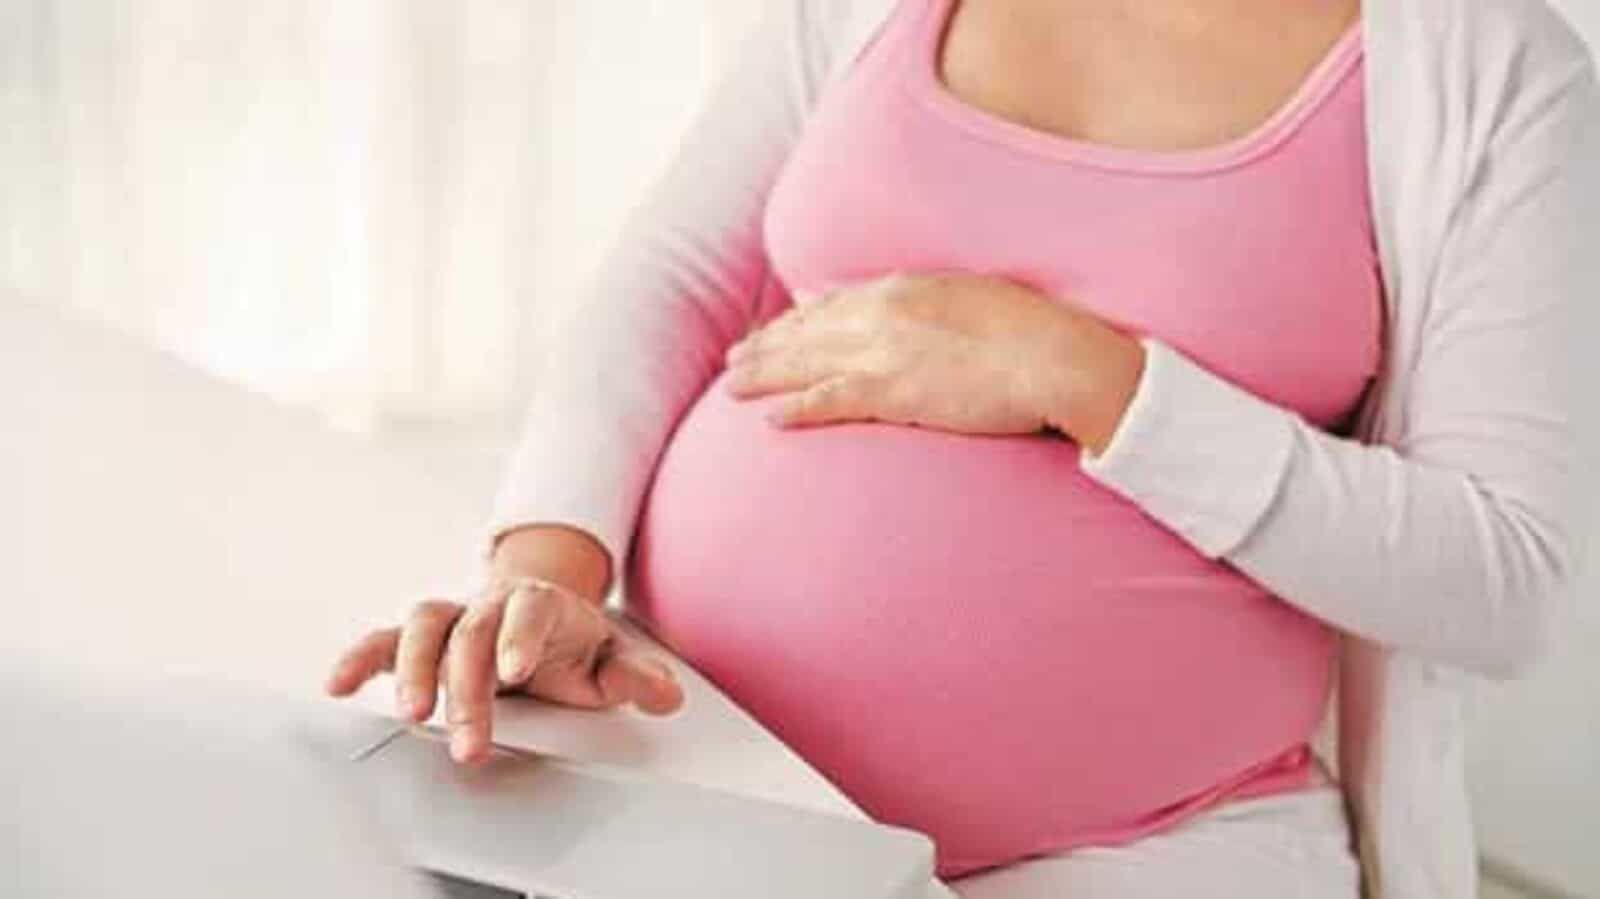 Maternal Deaths Surge to Highest Rate in 60 Years In US: Report